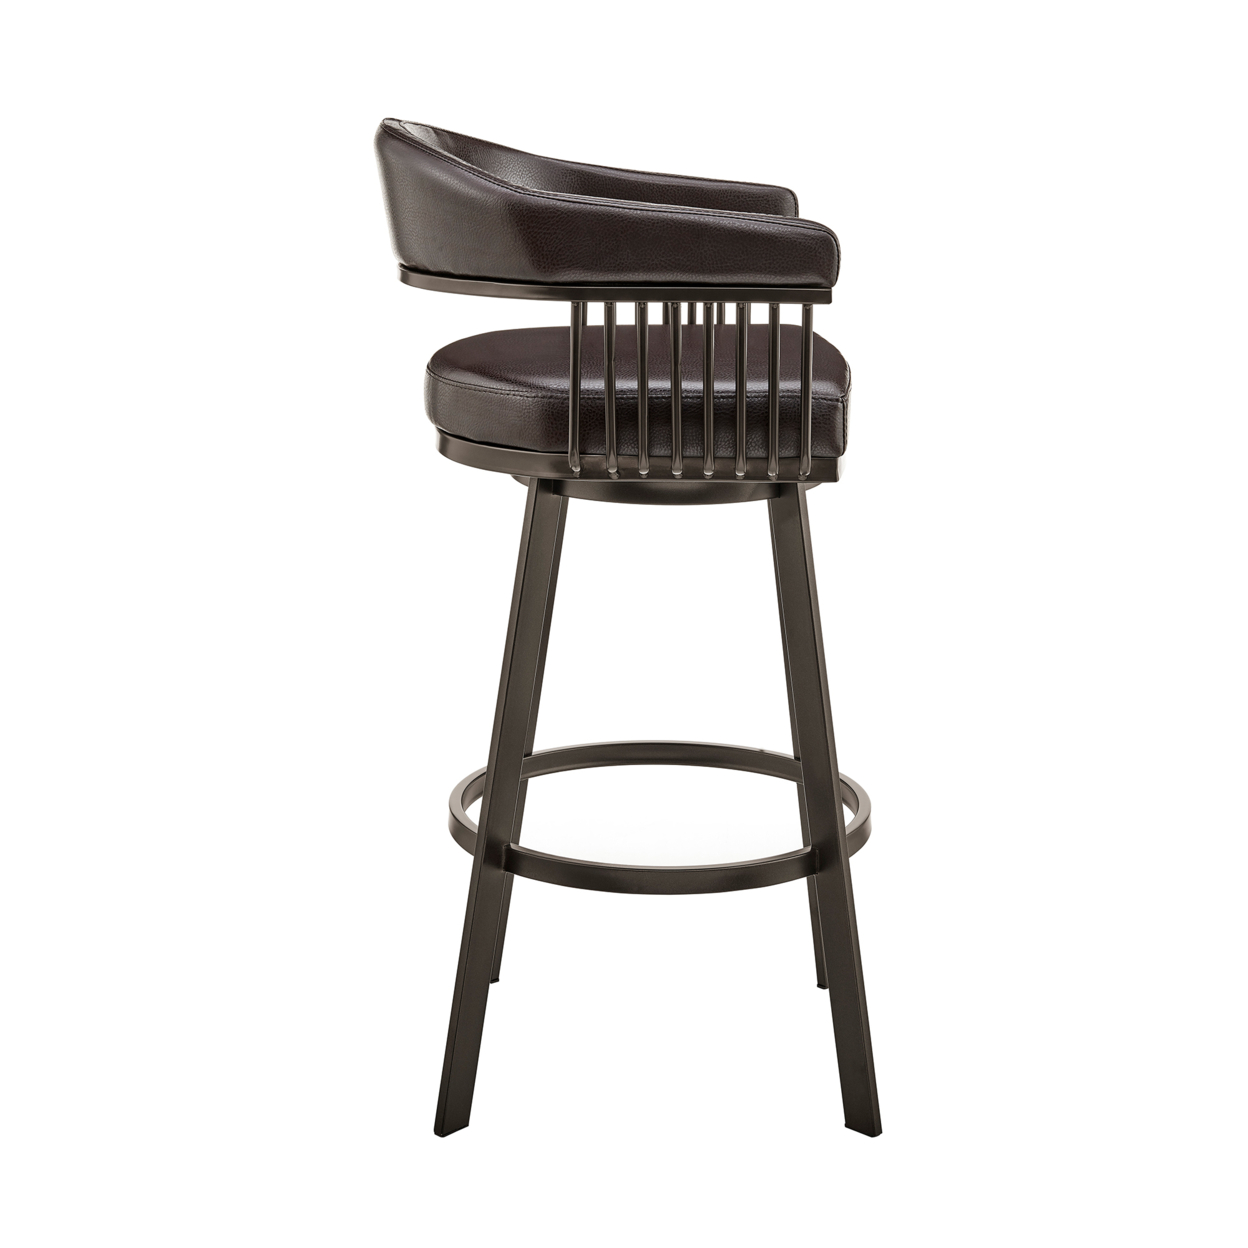 Swivel Barstool With Open Metal Frame And Slatted Arms, Brown- Saltoro Sherpi